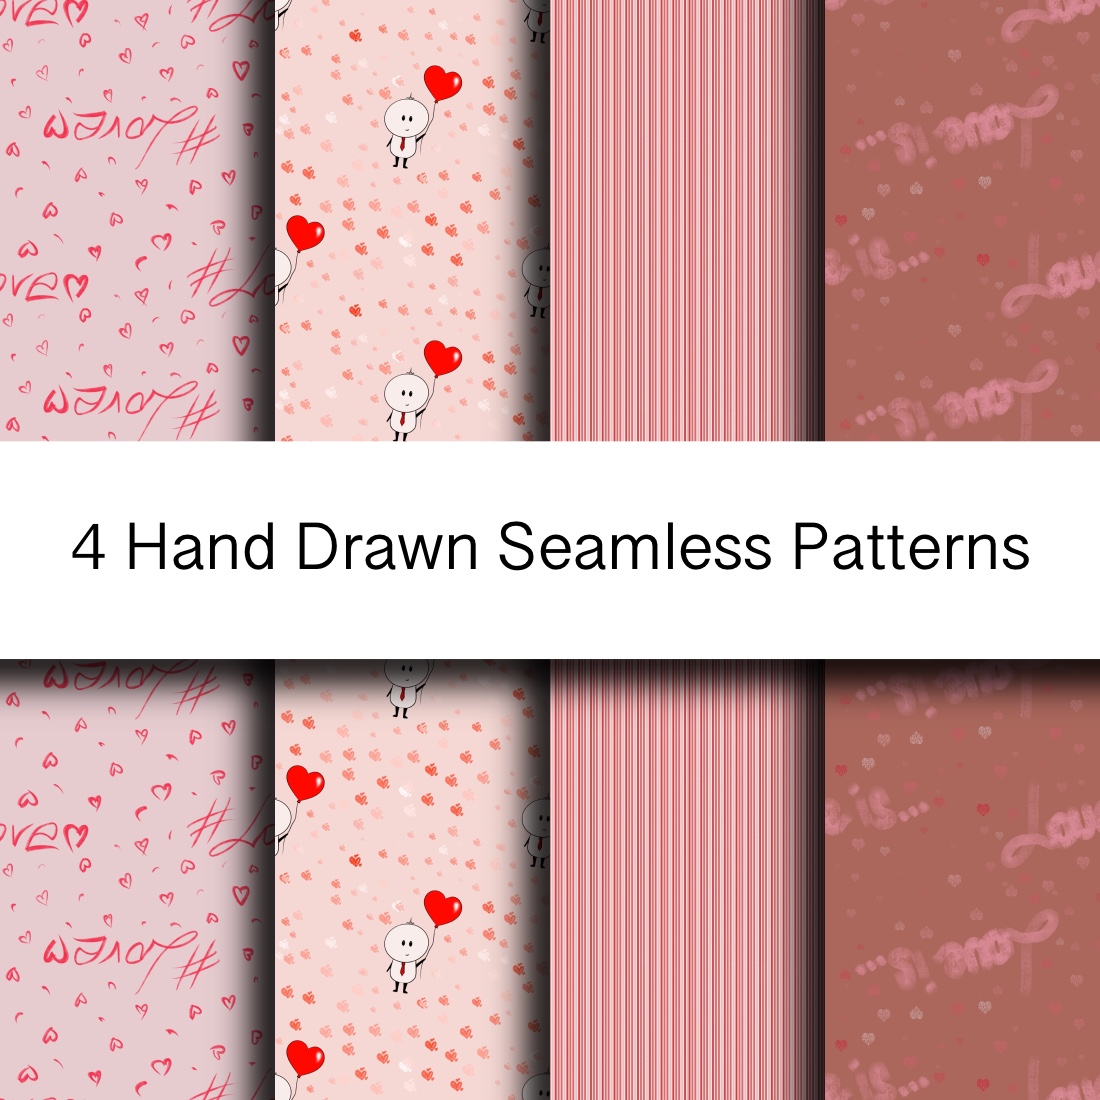 4 Love Seamless Patterns with Hearts cover image.